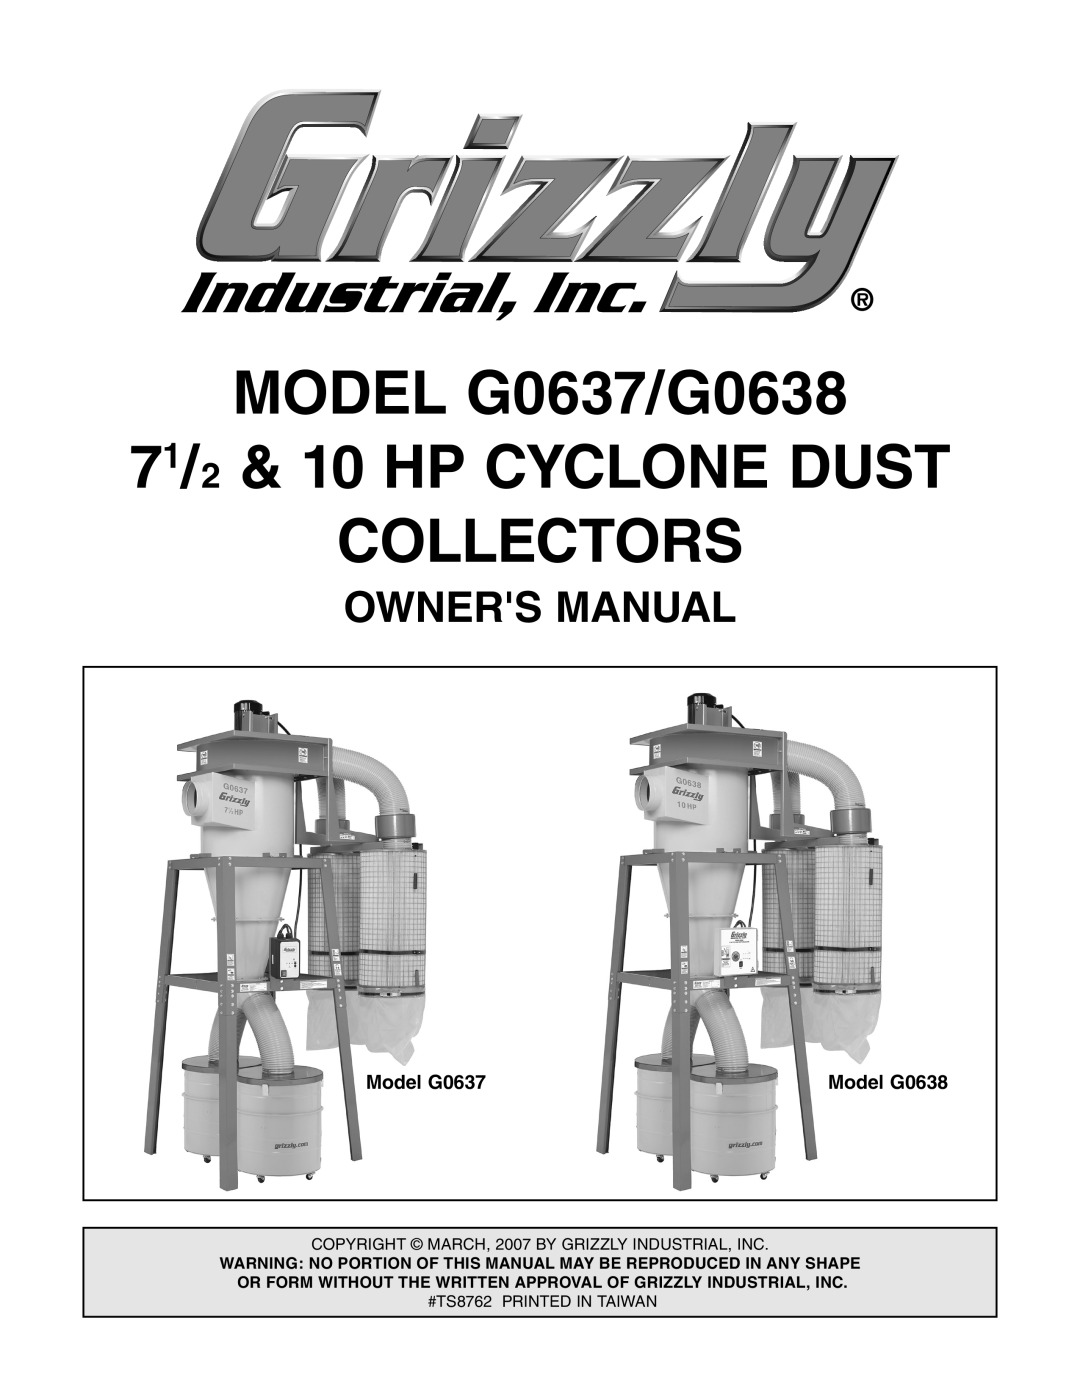 Grizzly owner manual BdYZa<%+, MODEL G0637/G0638 71/2 & 10 HP CYCLONE DUST, Collectors 